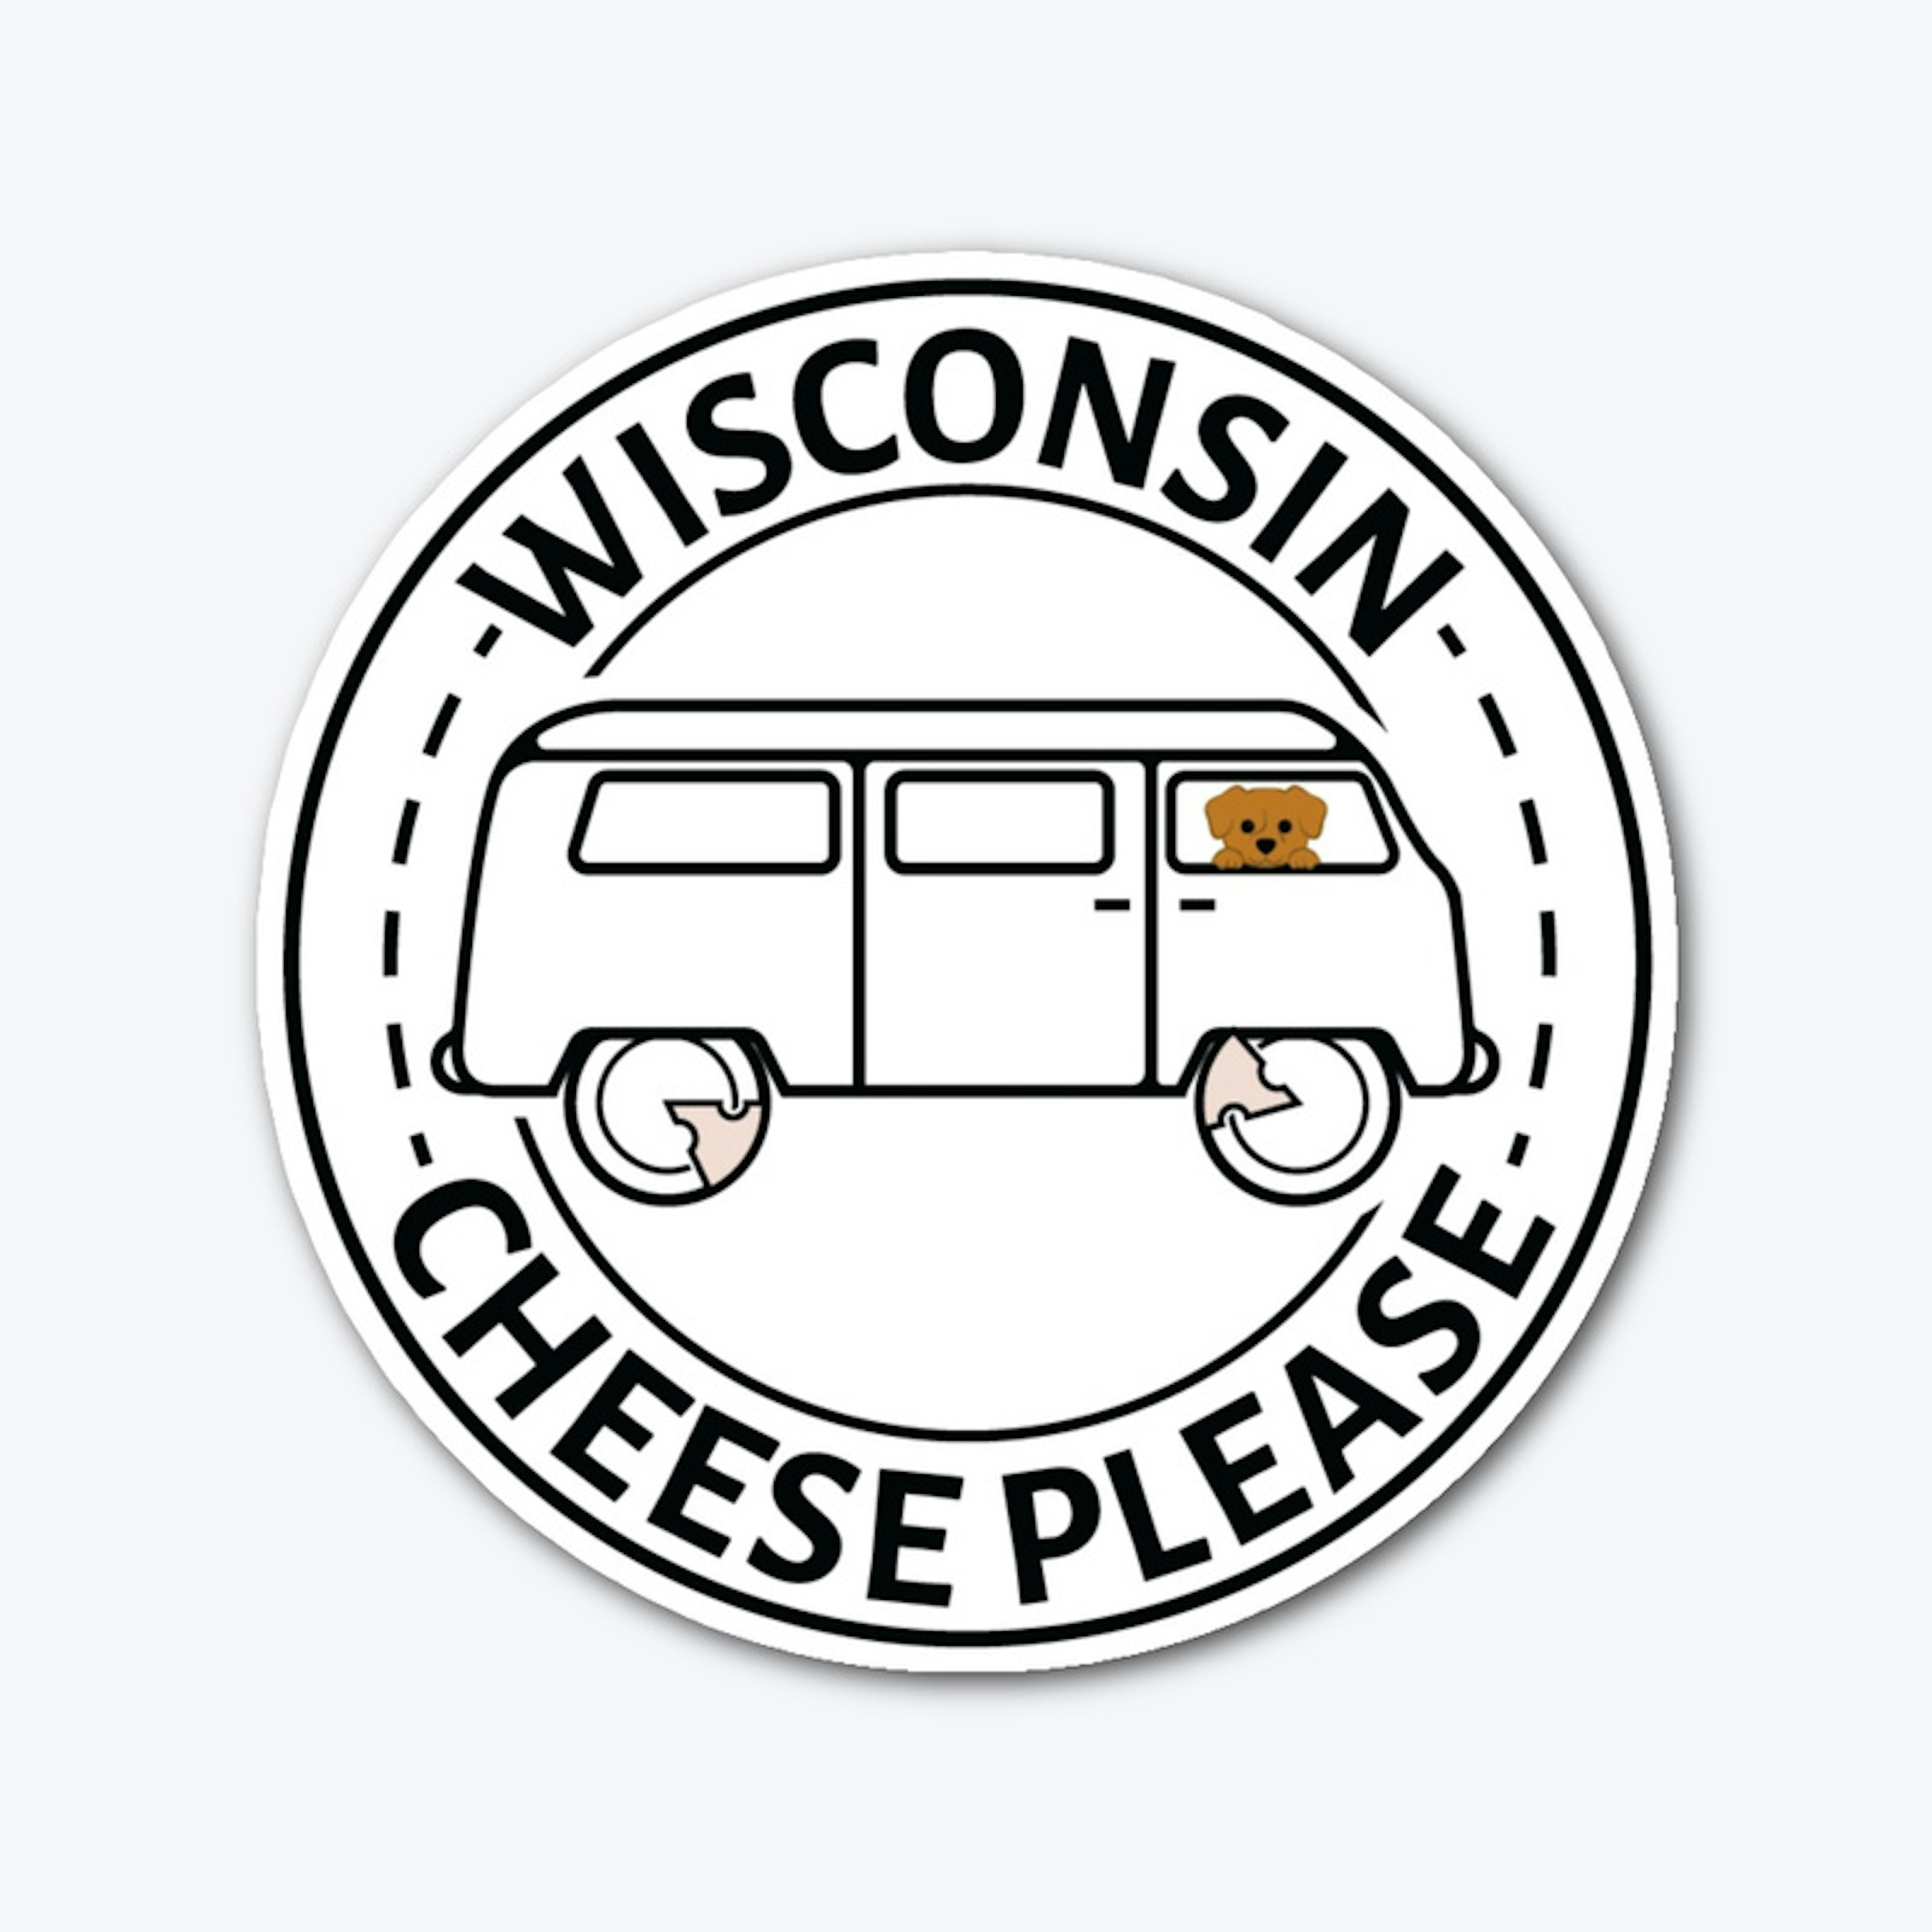 Wisconsin Cheese Please